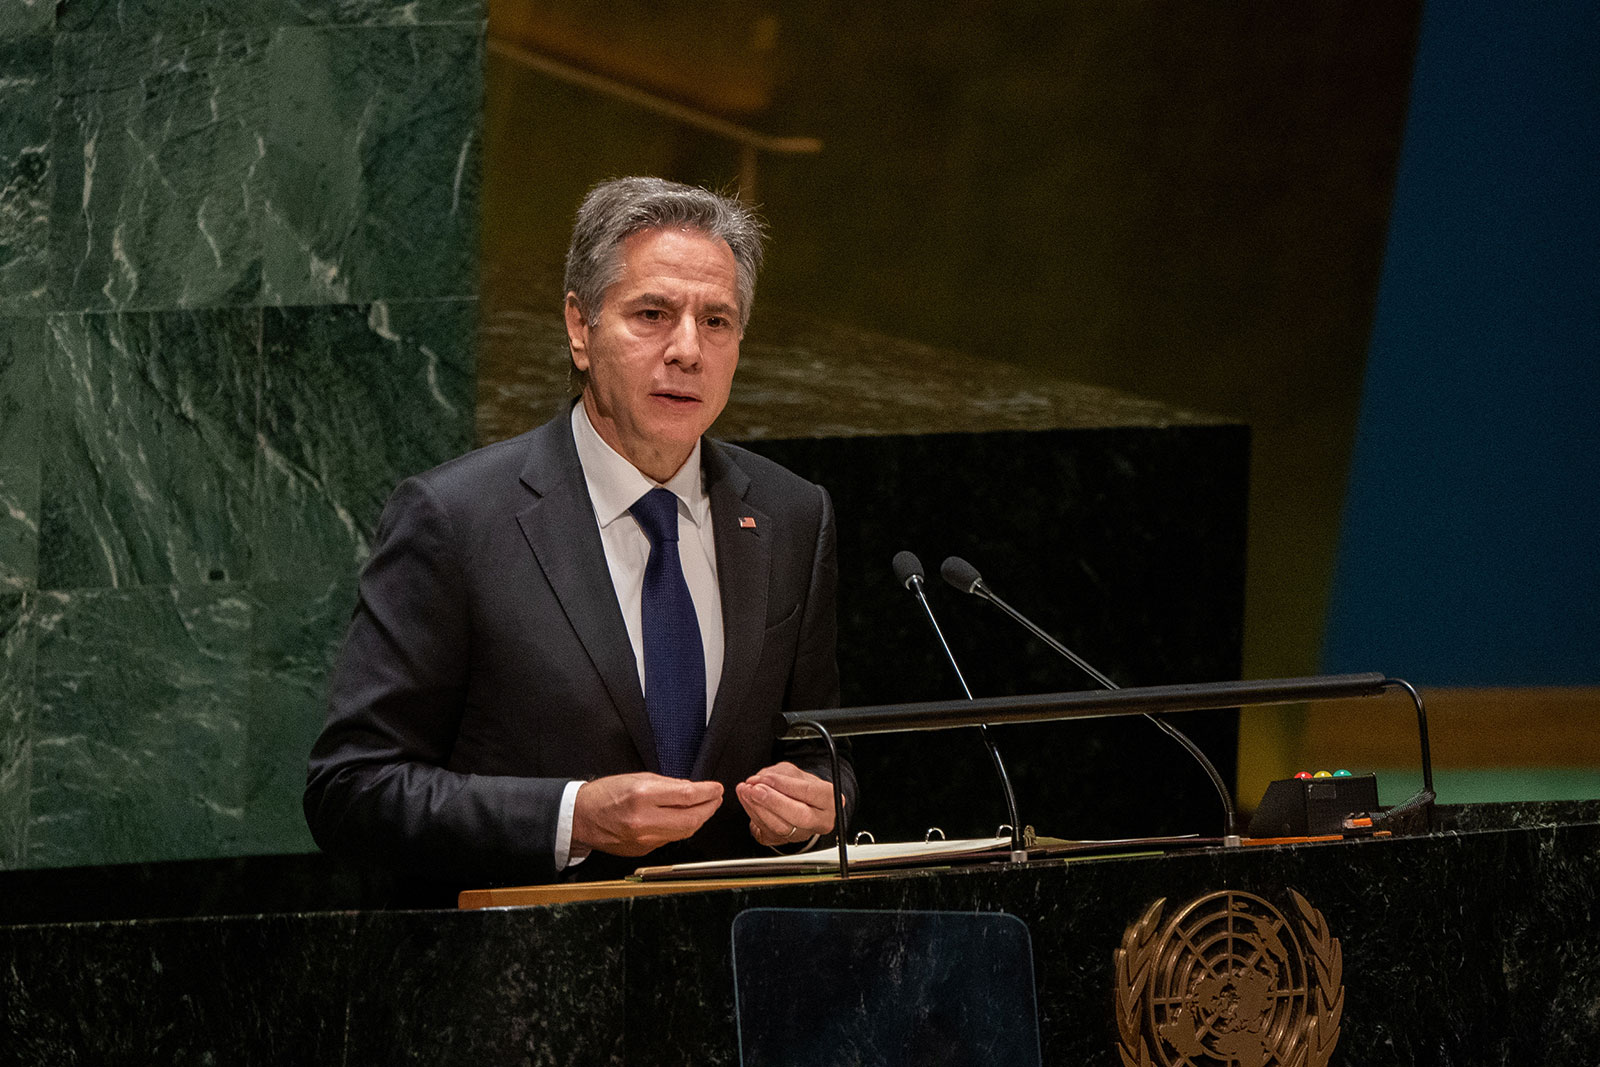 US Secretary of State Antony Blinken addresses the United Nations General Assembly at the Non-Proliferation Treaty Review Conference in New York on August 1.